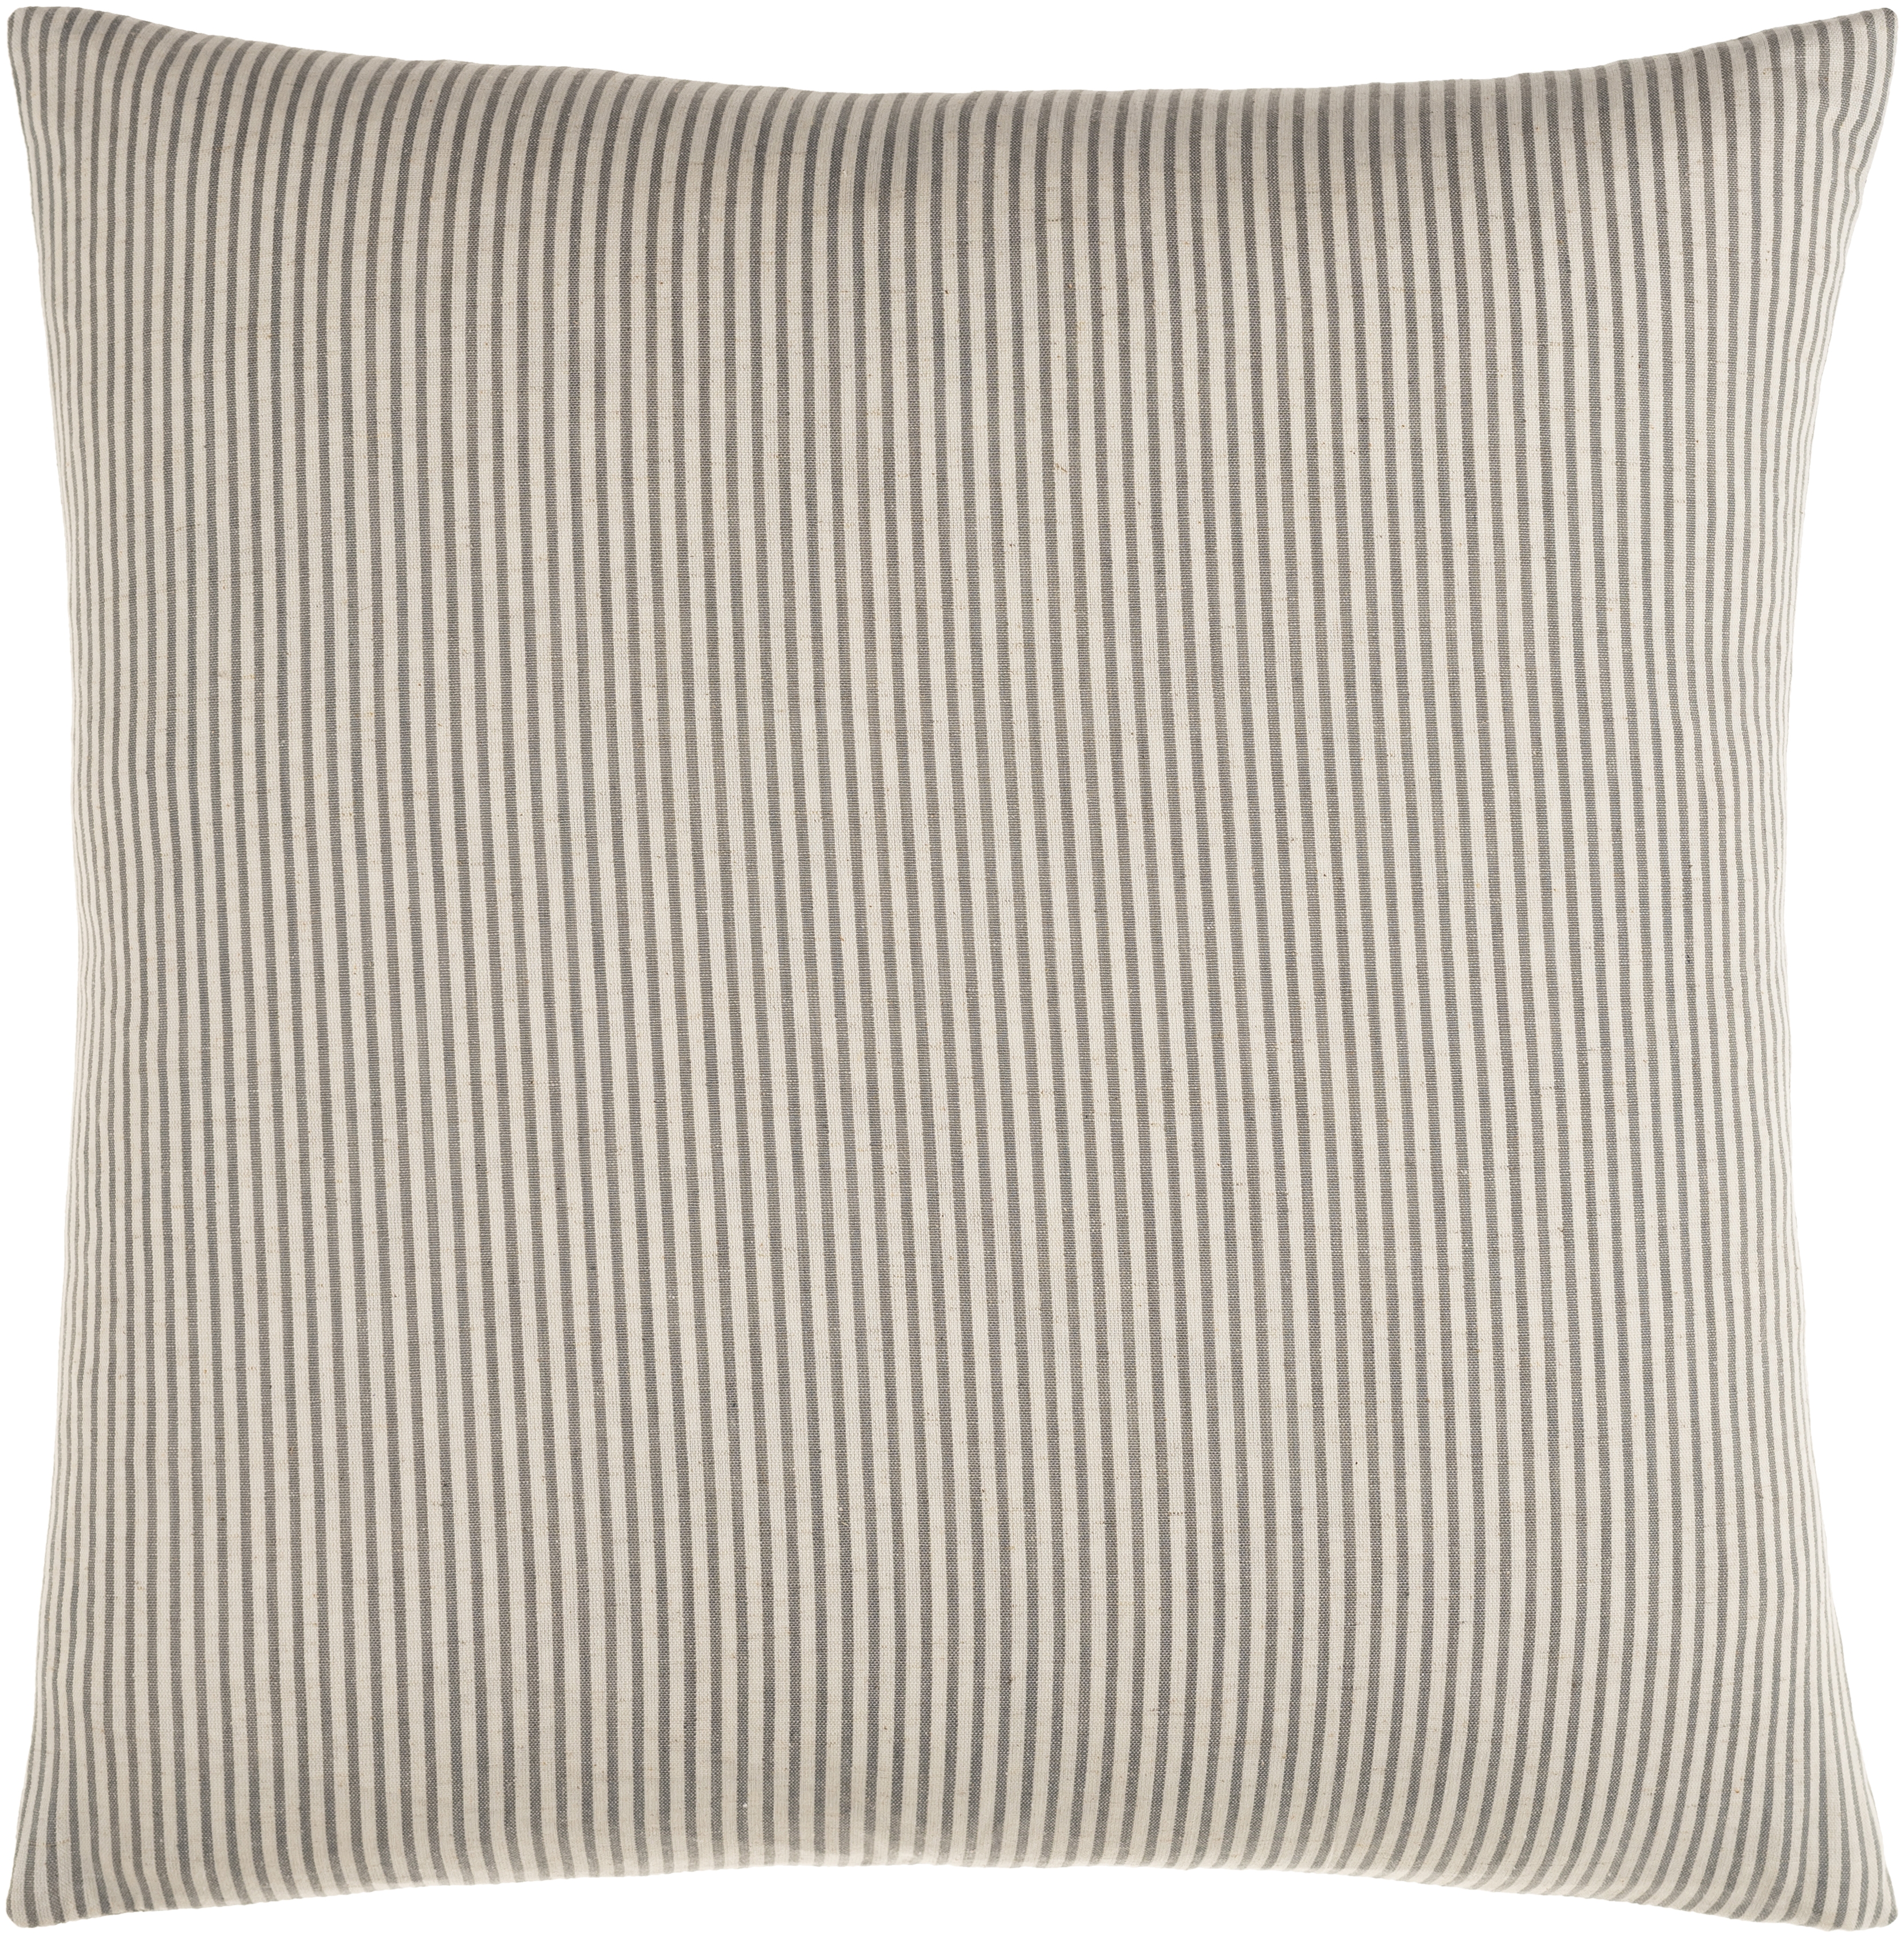 Skinny Stripe Throw Pillow, 20" x 20", with down insert - Image 0